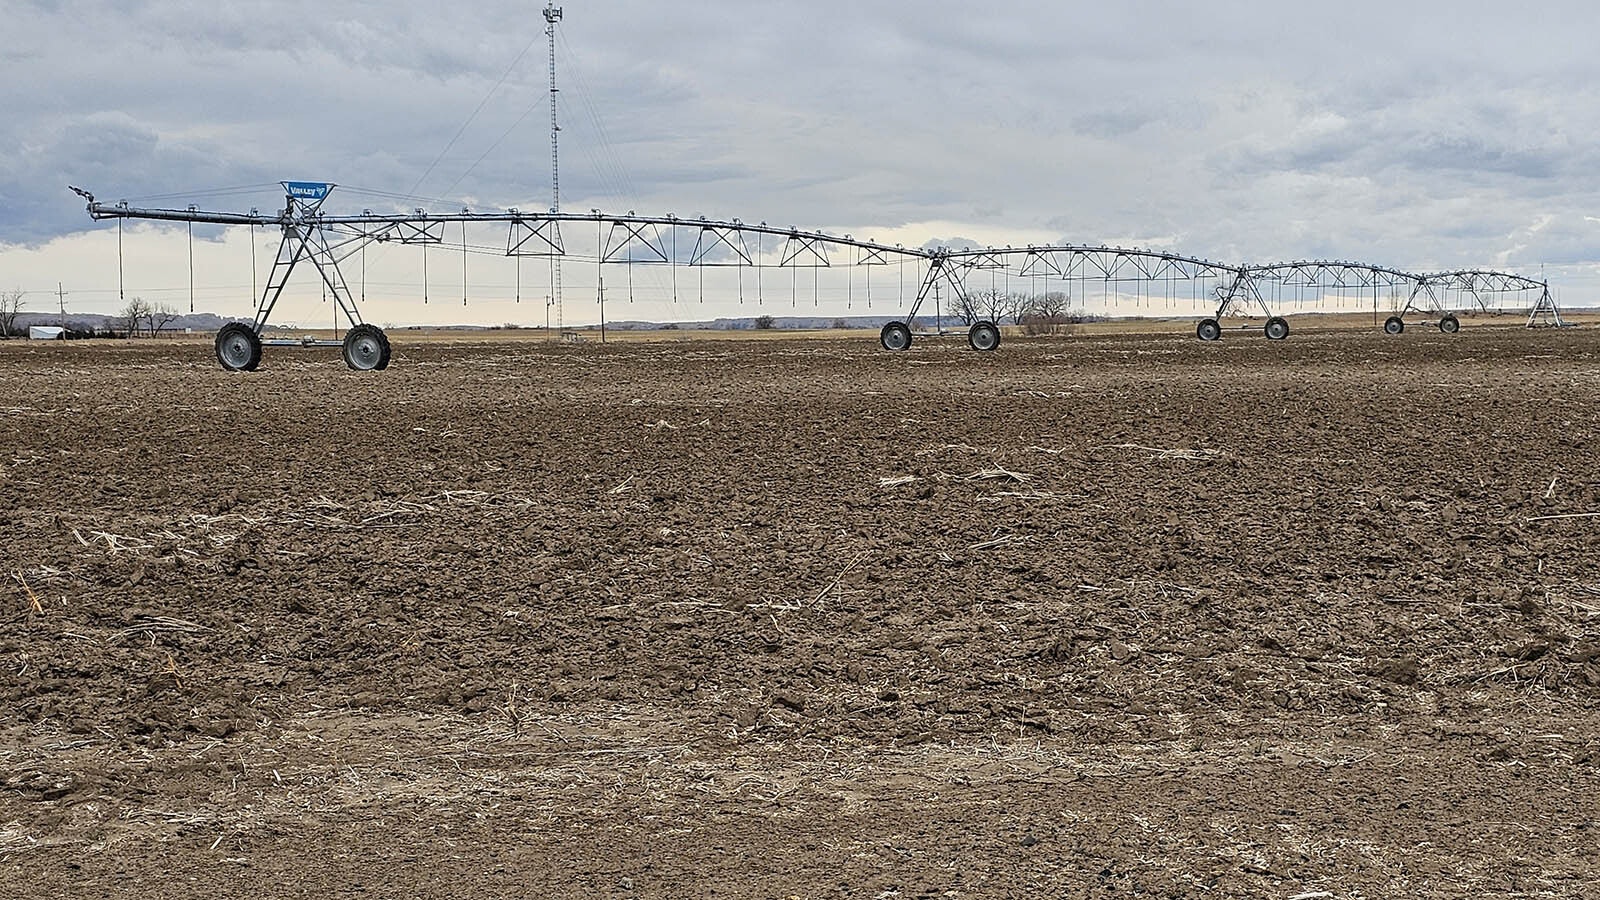 A grant has helped place an irrigation pivot at a hemp research farm in Hawk Springs.